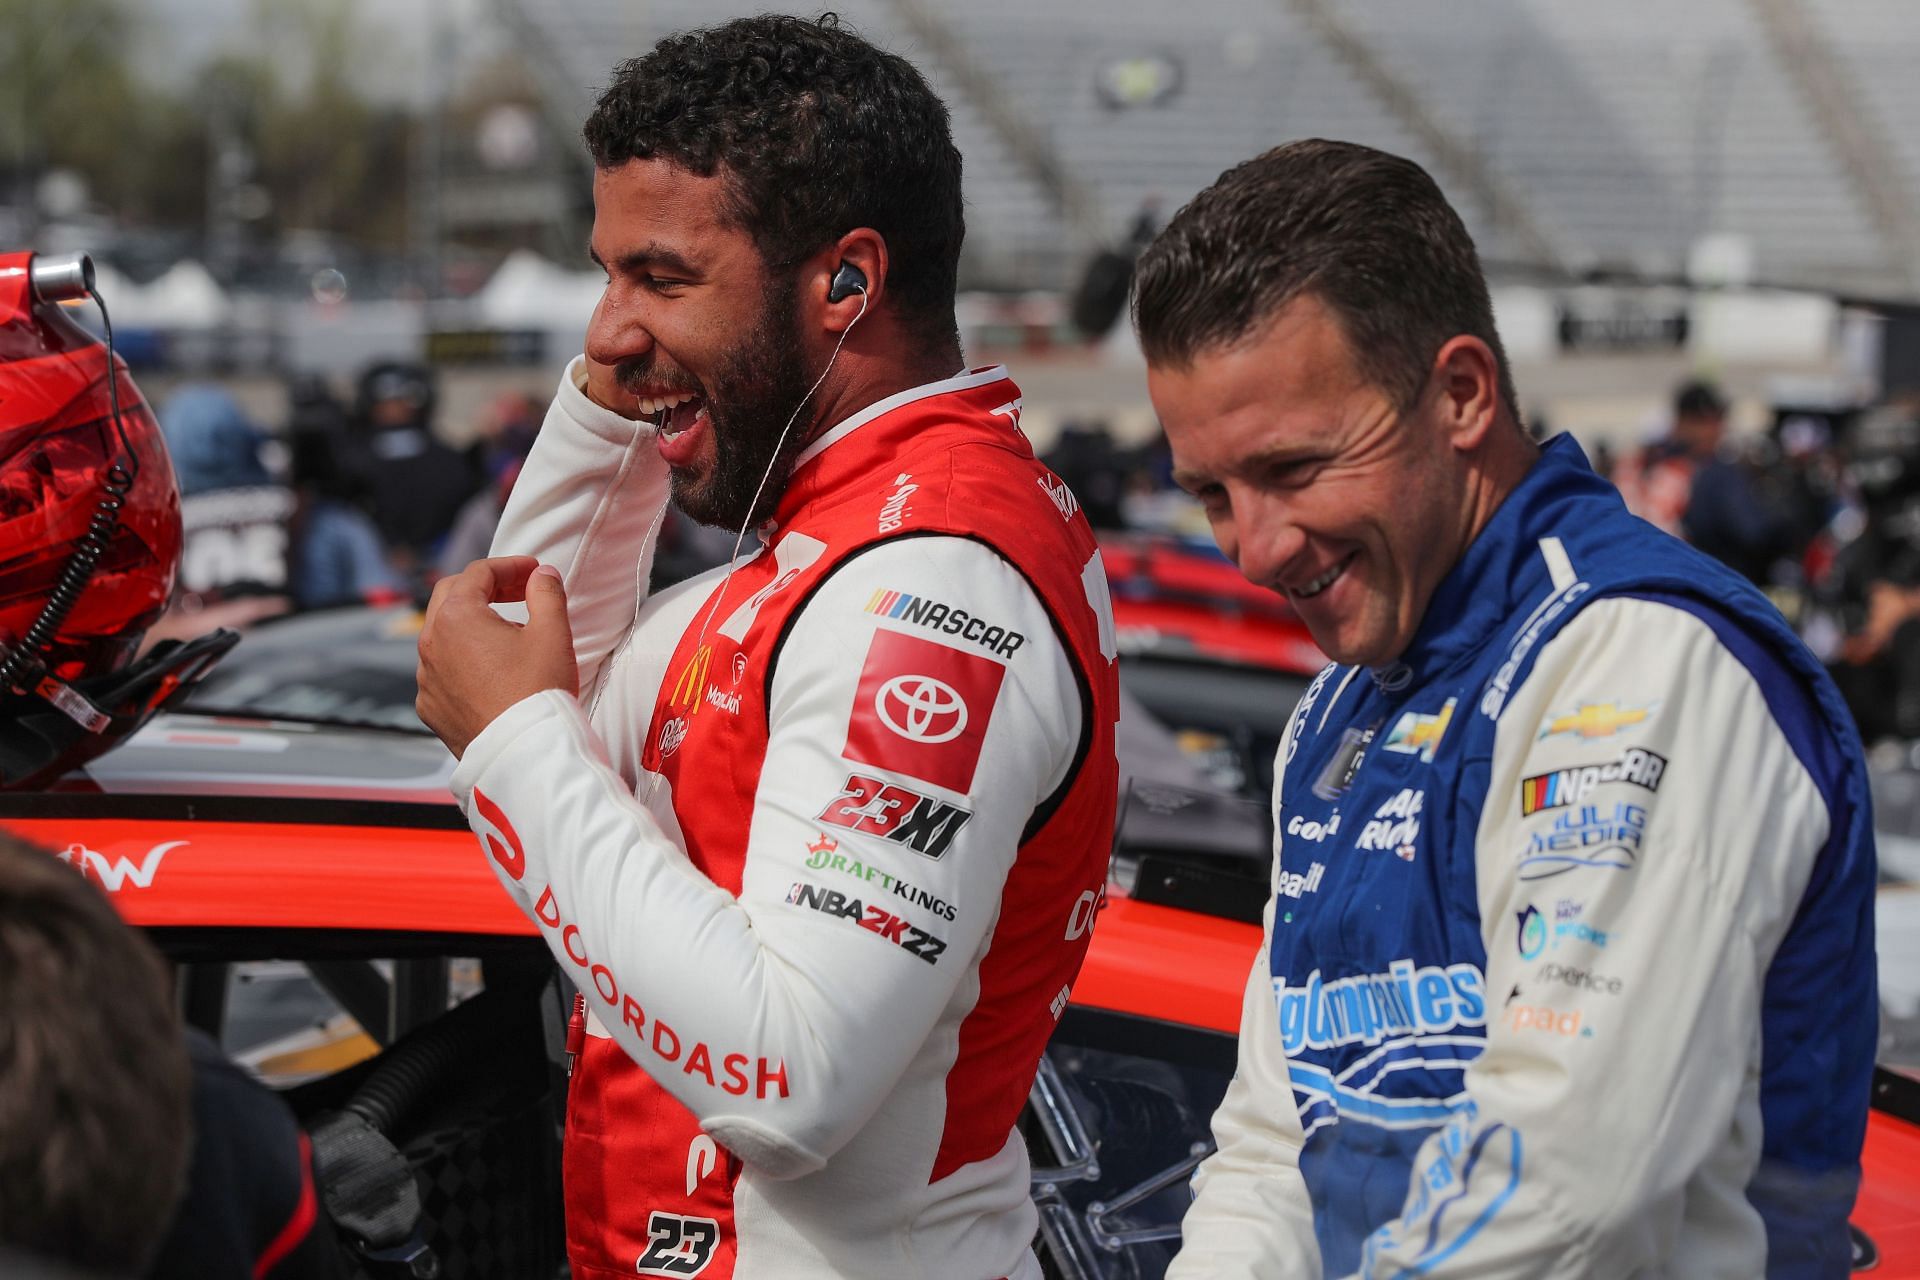 AJ Allmendinger (right) and Bubba Wallace (left) share a laugh on the grid during practice for the NASCAR Cup Series Blue-Emu Maximum Pain Relief 400 at Martinsville Speedway.